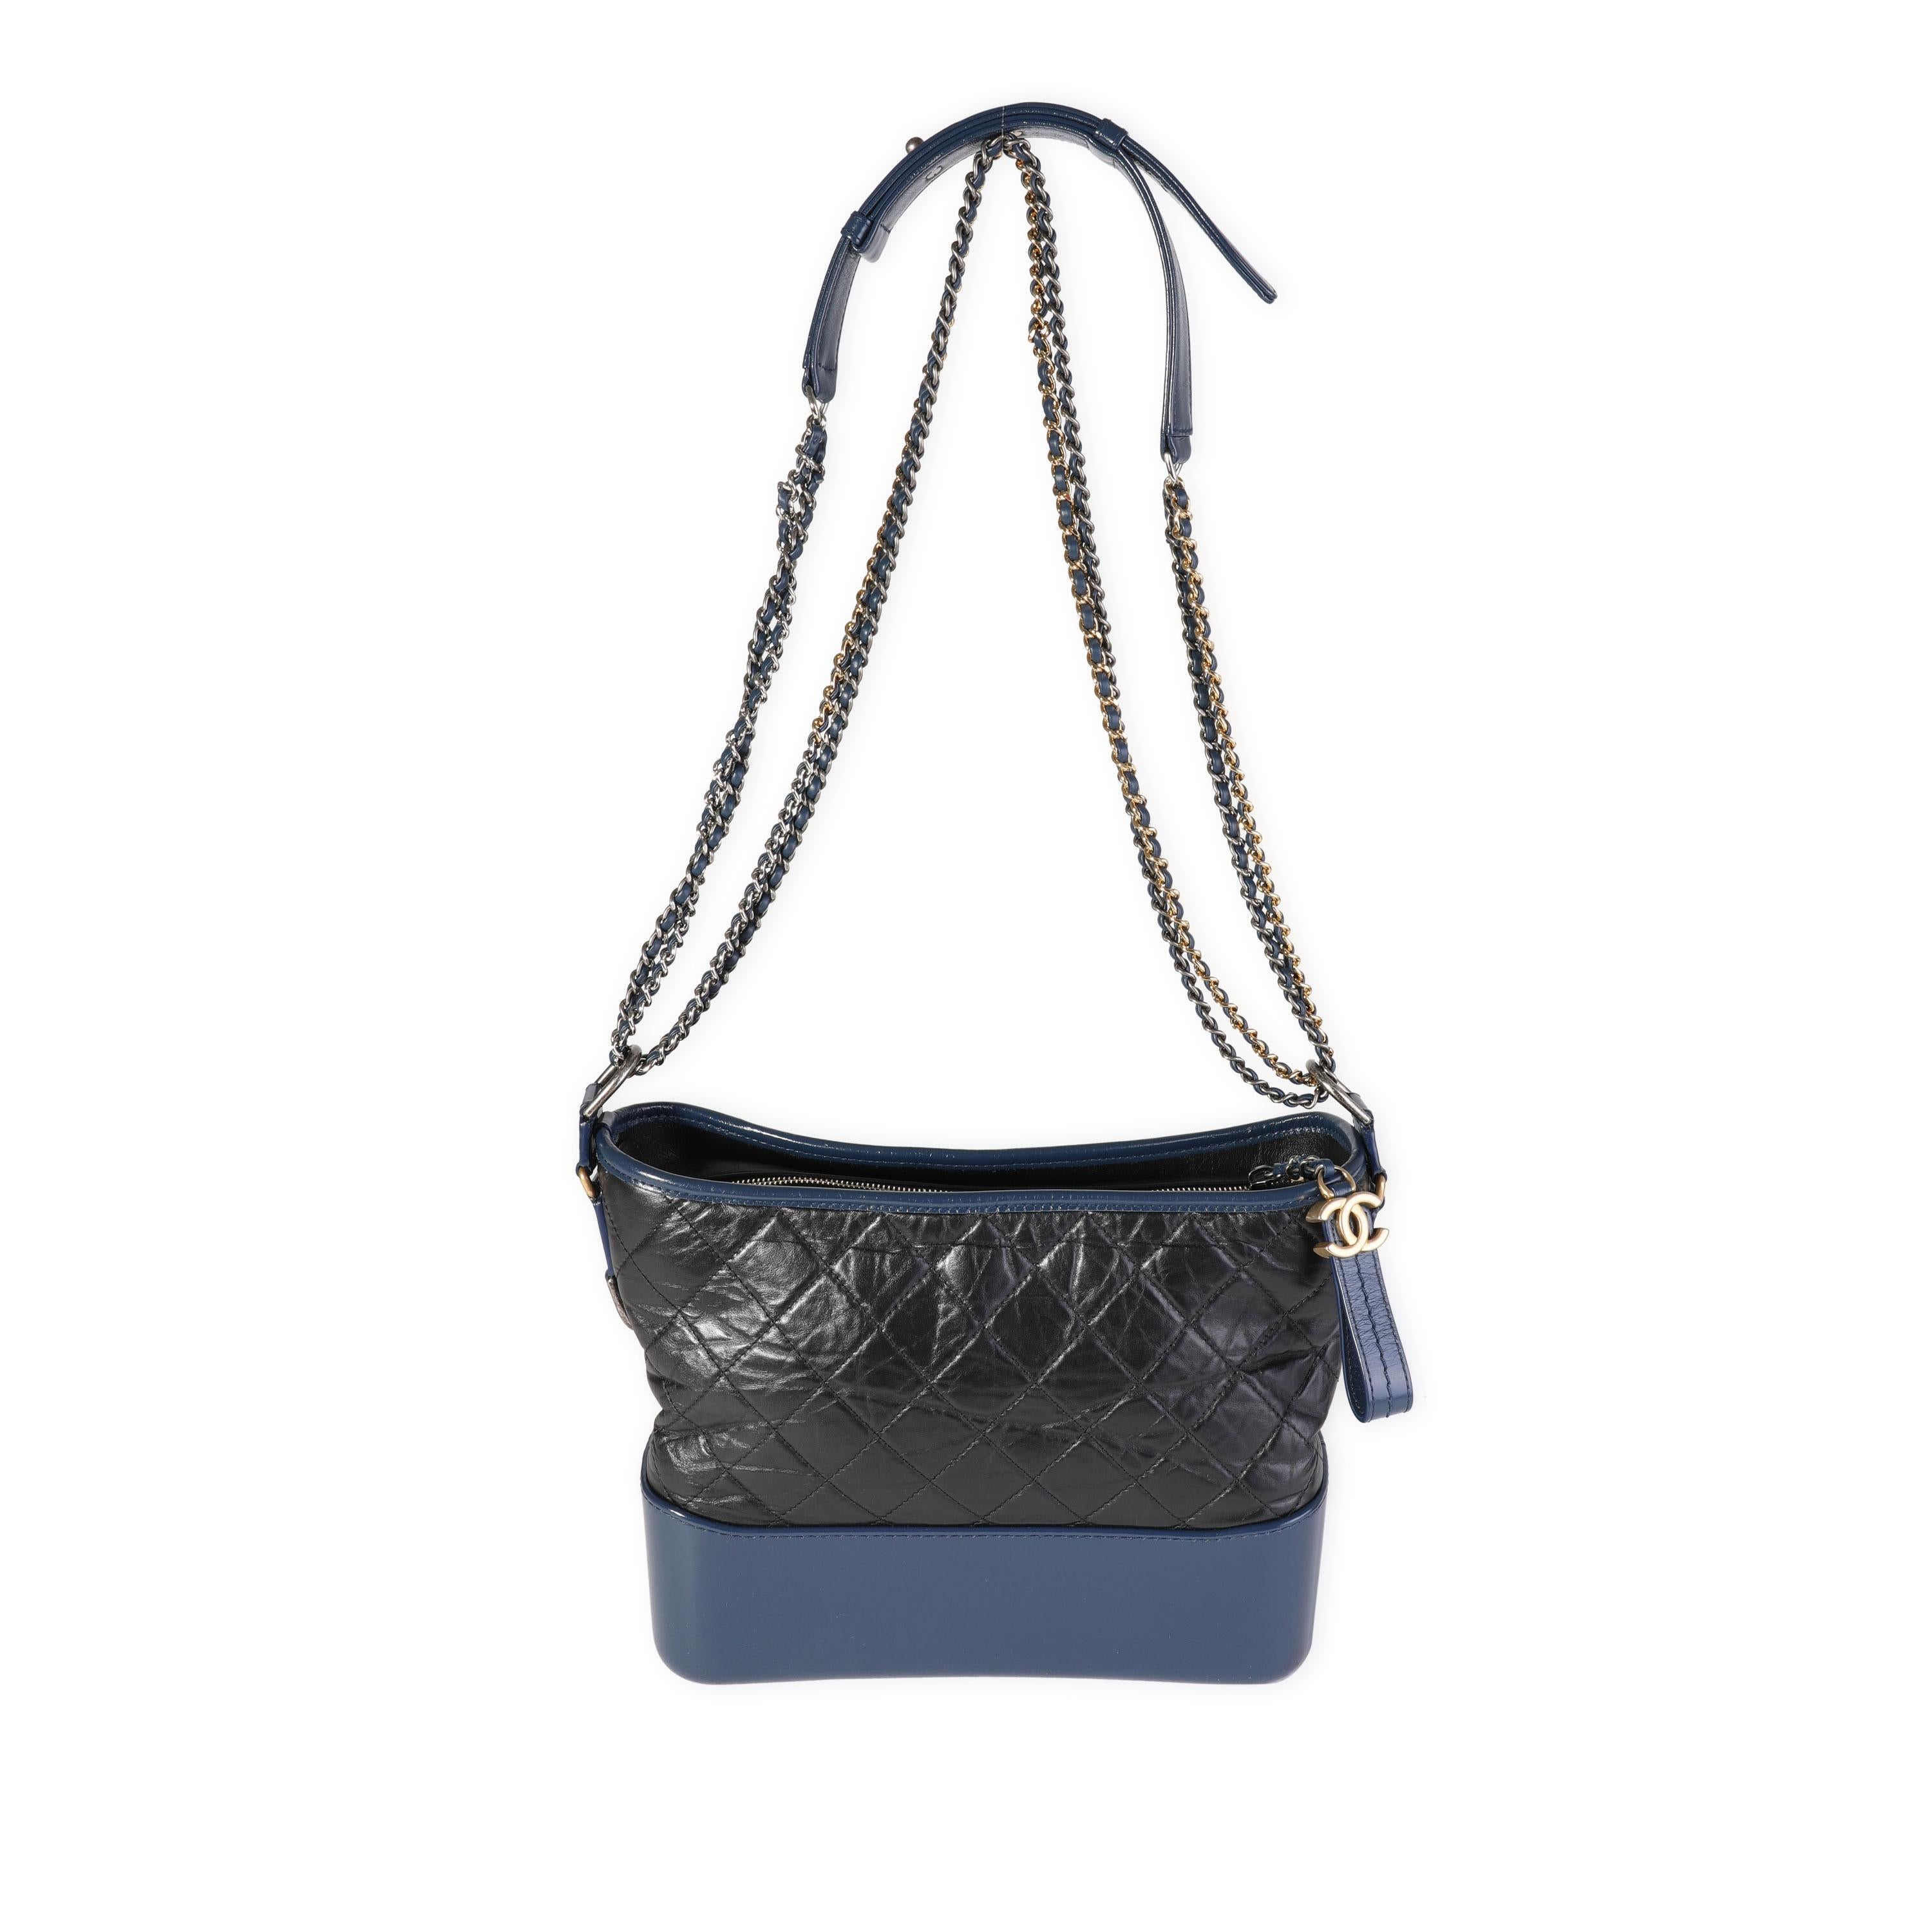 Listing Title: Chanel Black & Blue Quilted Aged Calfskin Large Gabrielle Hobo
SKU: 119004
Condition: Pre-owned (3000)
Handbag Condition: Very Good
Condition Comments: Scratches to corners and bottom. Interior shows signs of use.
Brand: Chanel
Model: